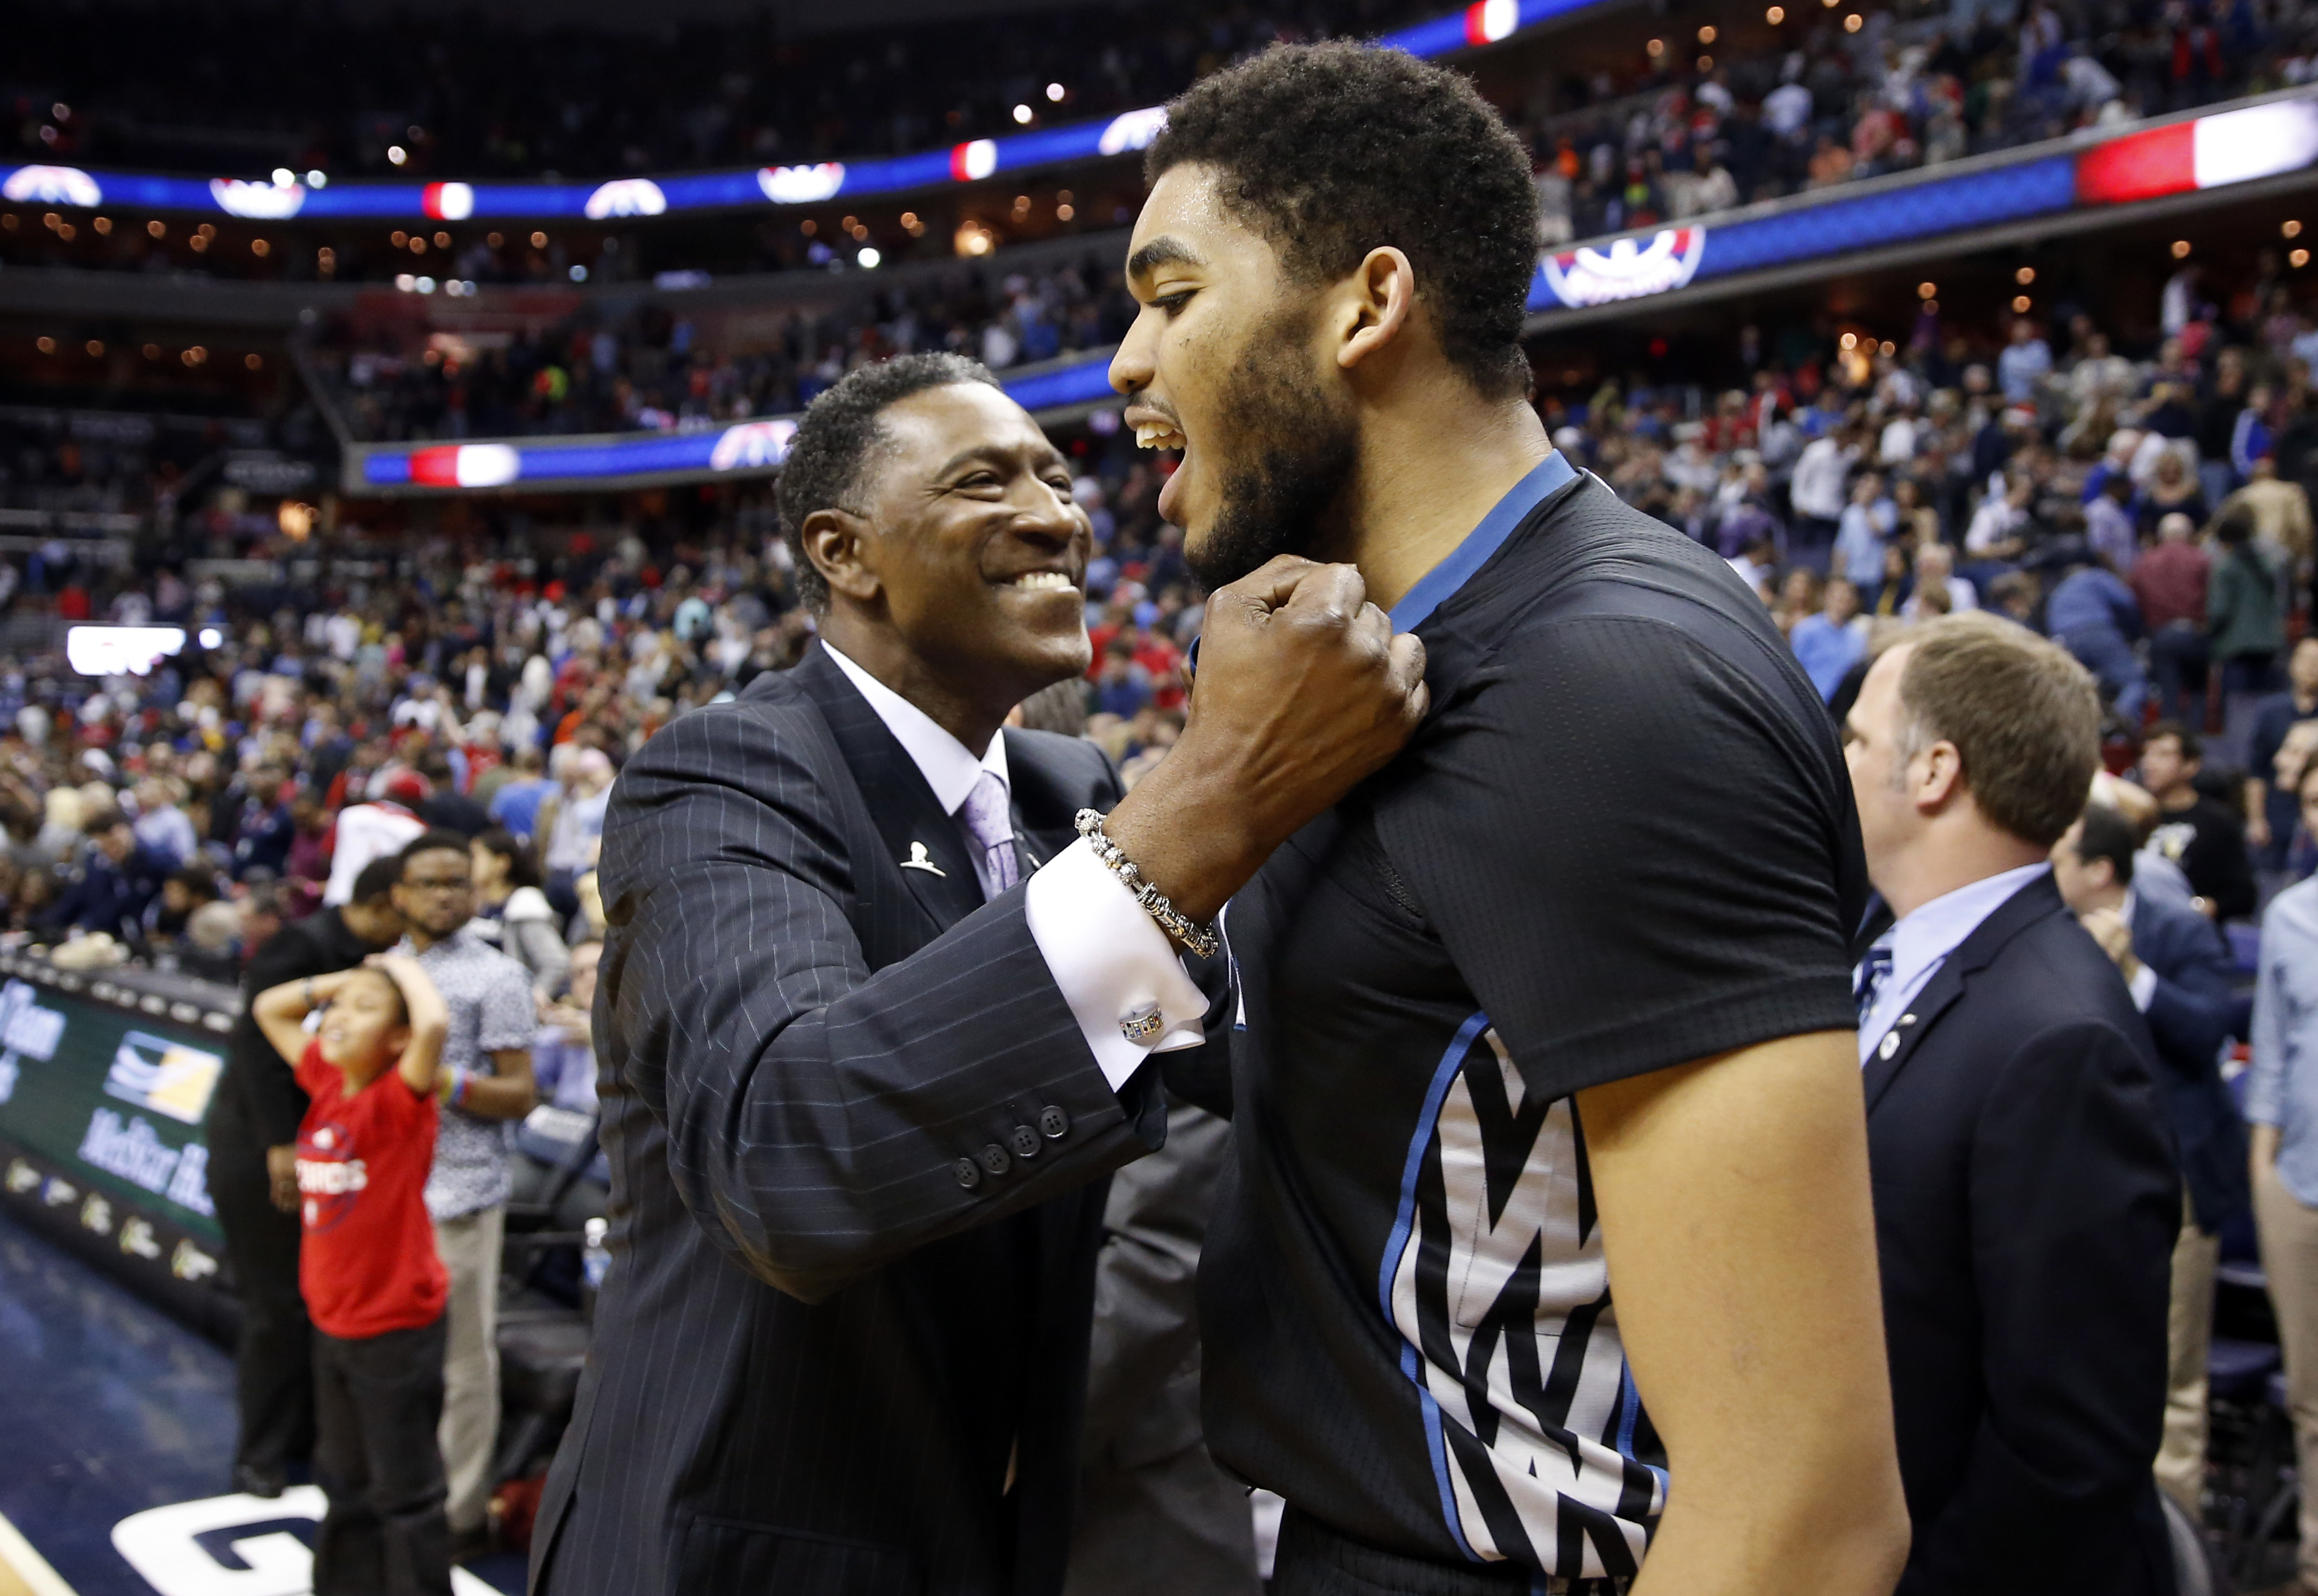 Minnesota Timberwolves coach Sam Mitchell celebrates with center Karl-Anthony Towns after the team's NBA basketball game against the Washington Wizards, Friday, March 25, 2016, in Washington. AP